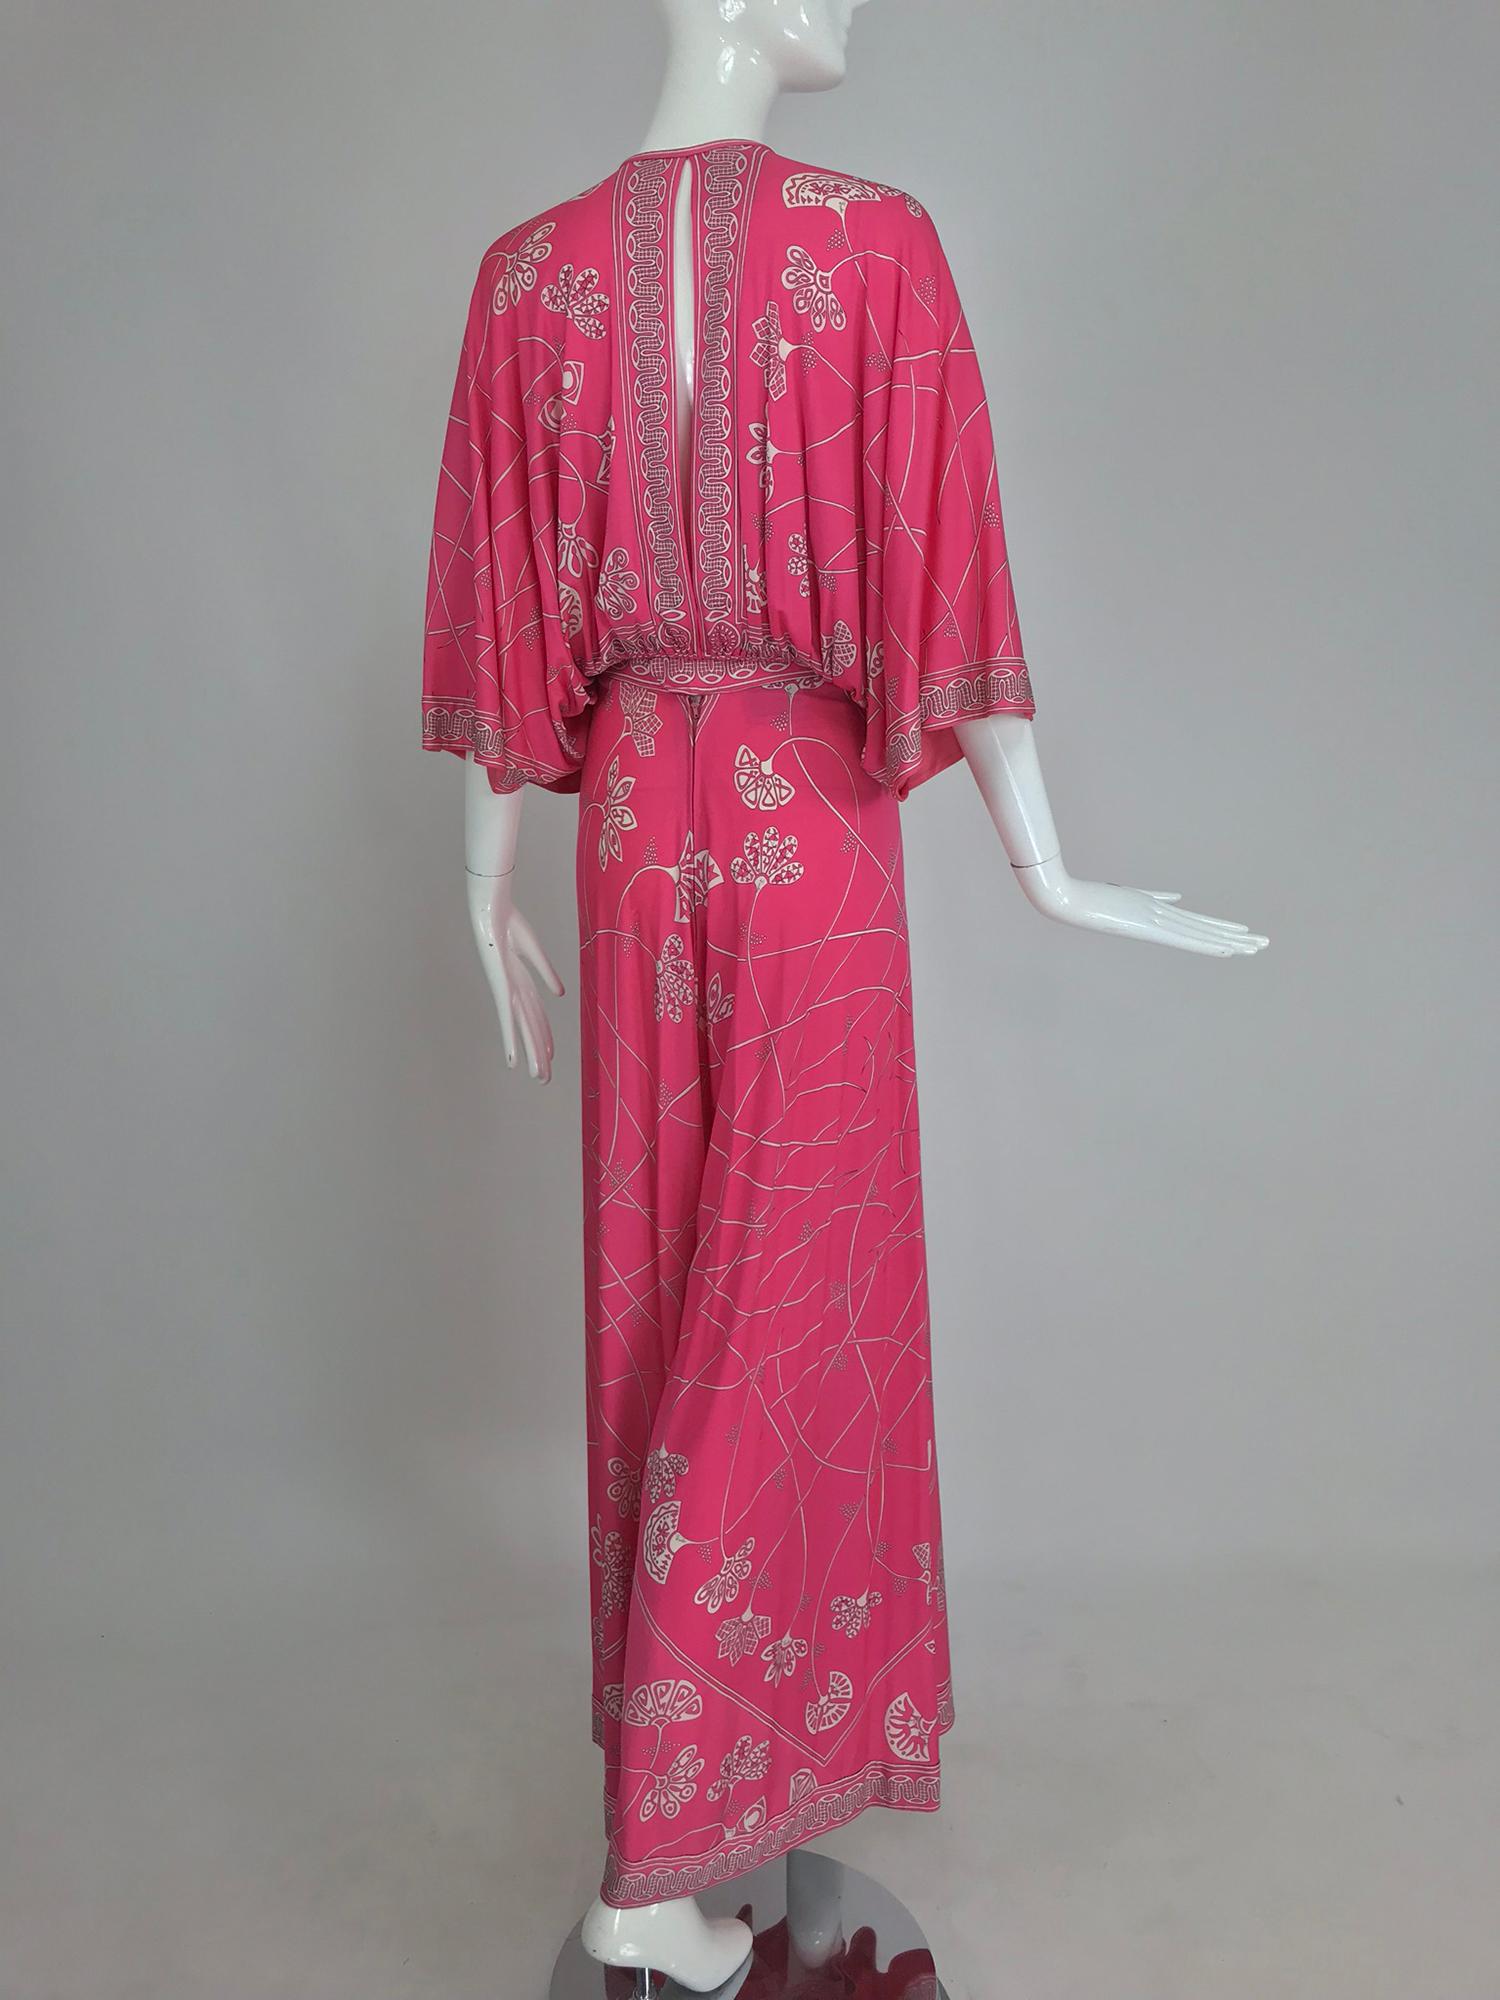 Women's Emilio Pucci silk jersey plunge top and palazzo trousers, 1970s